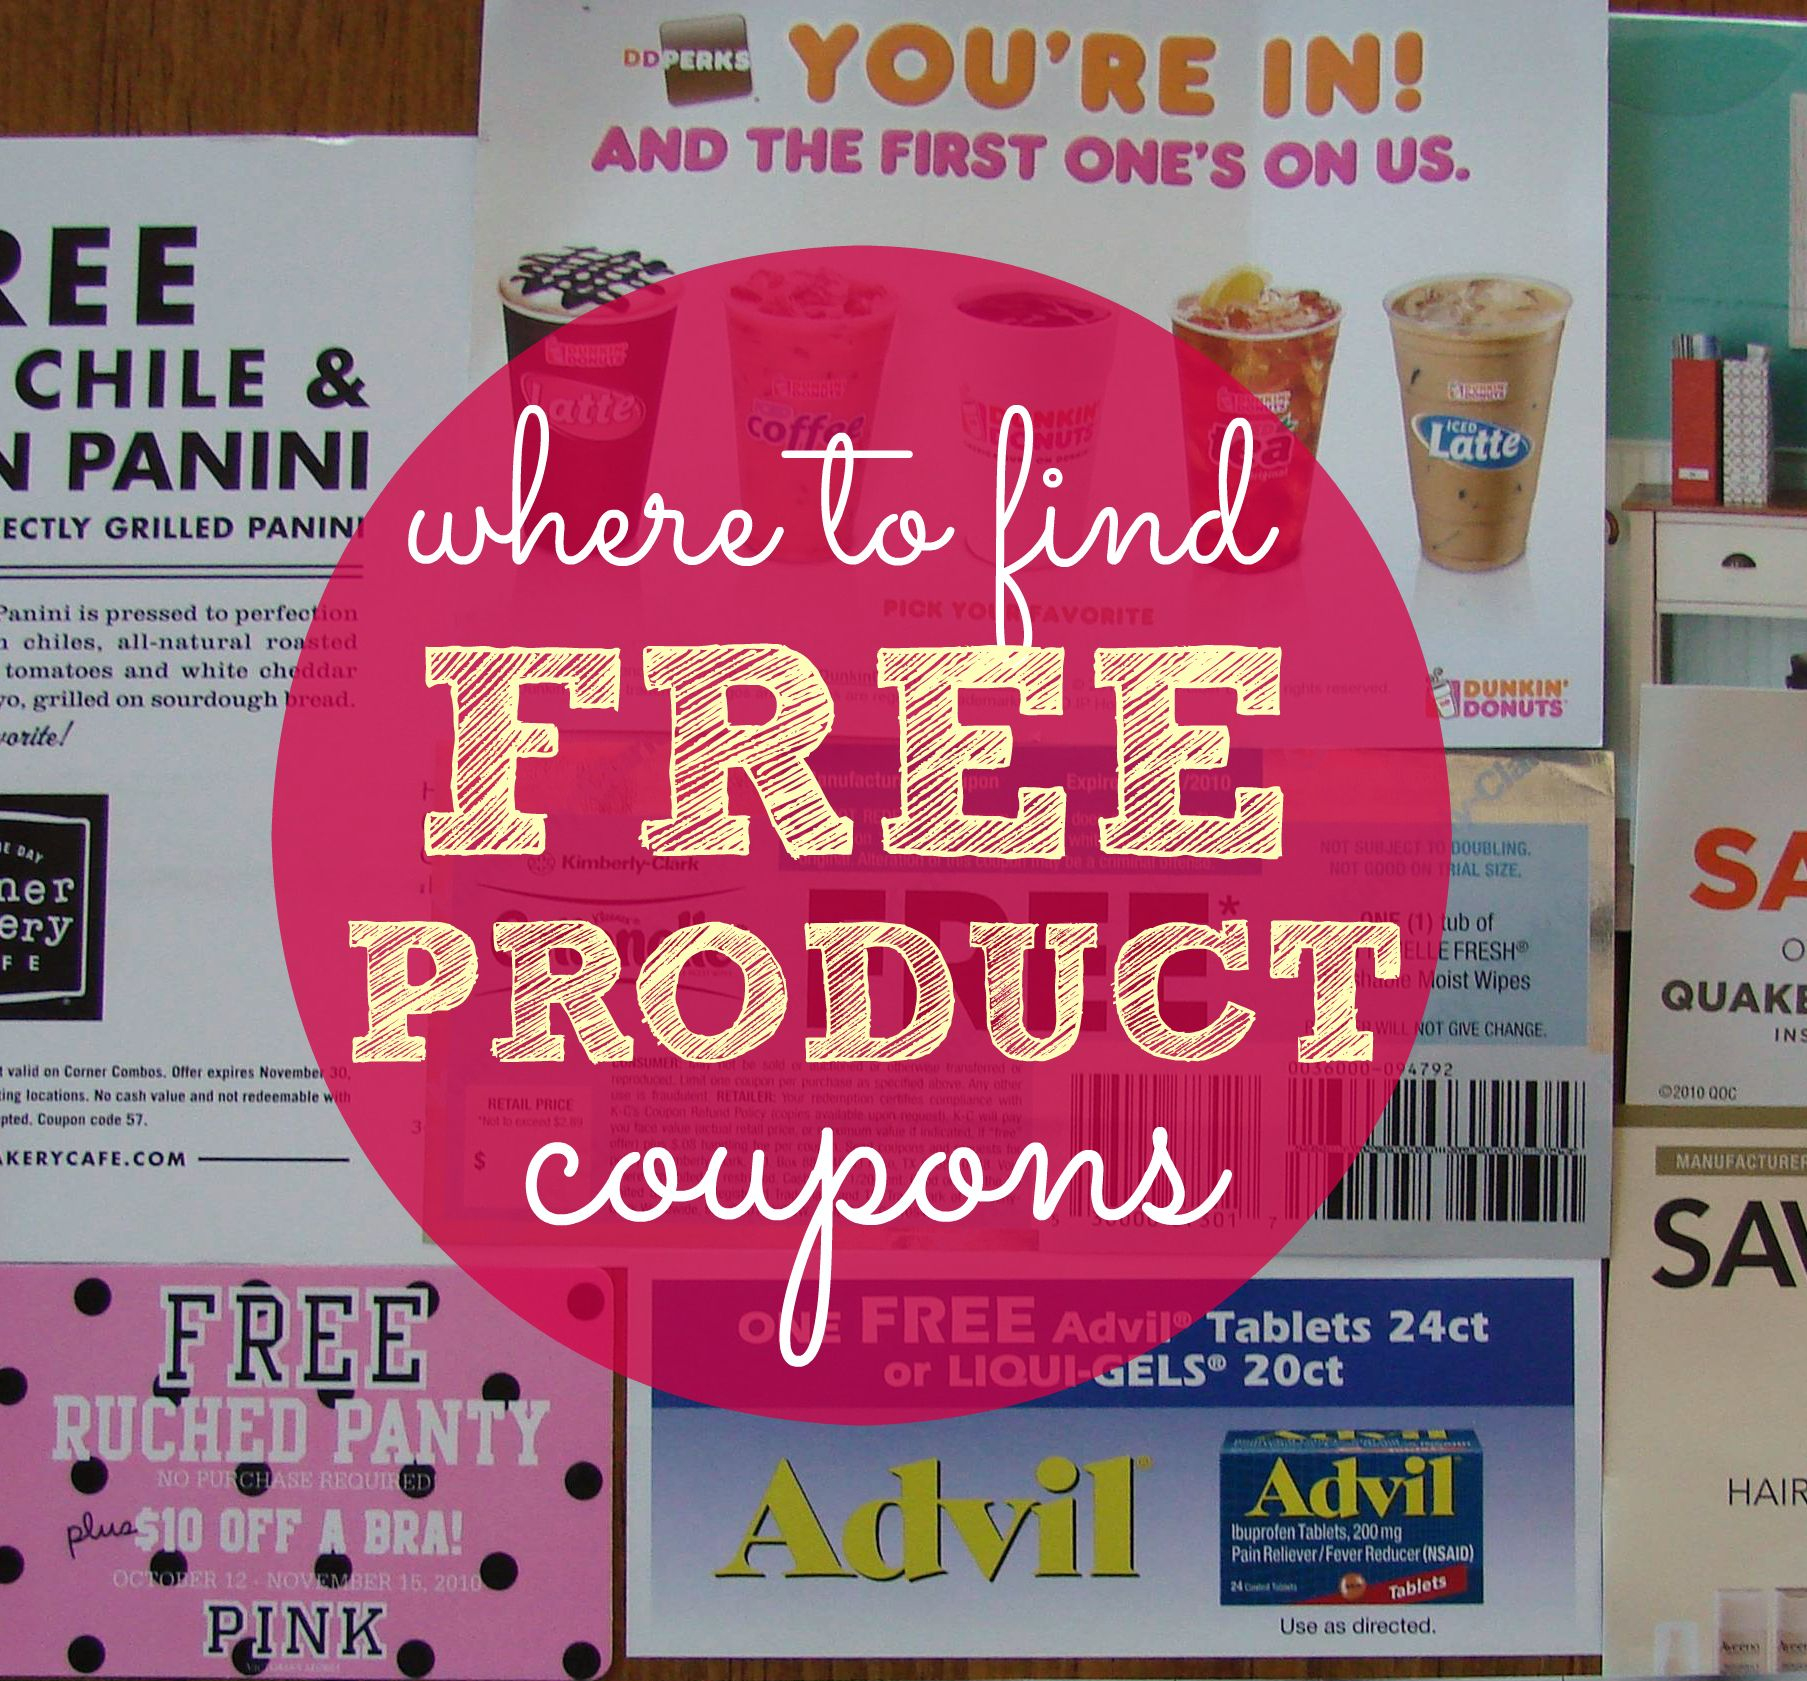 Couponing Can Save Us A Lot Of Money Over Time. But High Value - Free High Value Printable Coupons